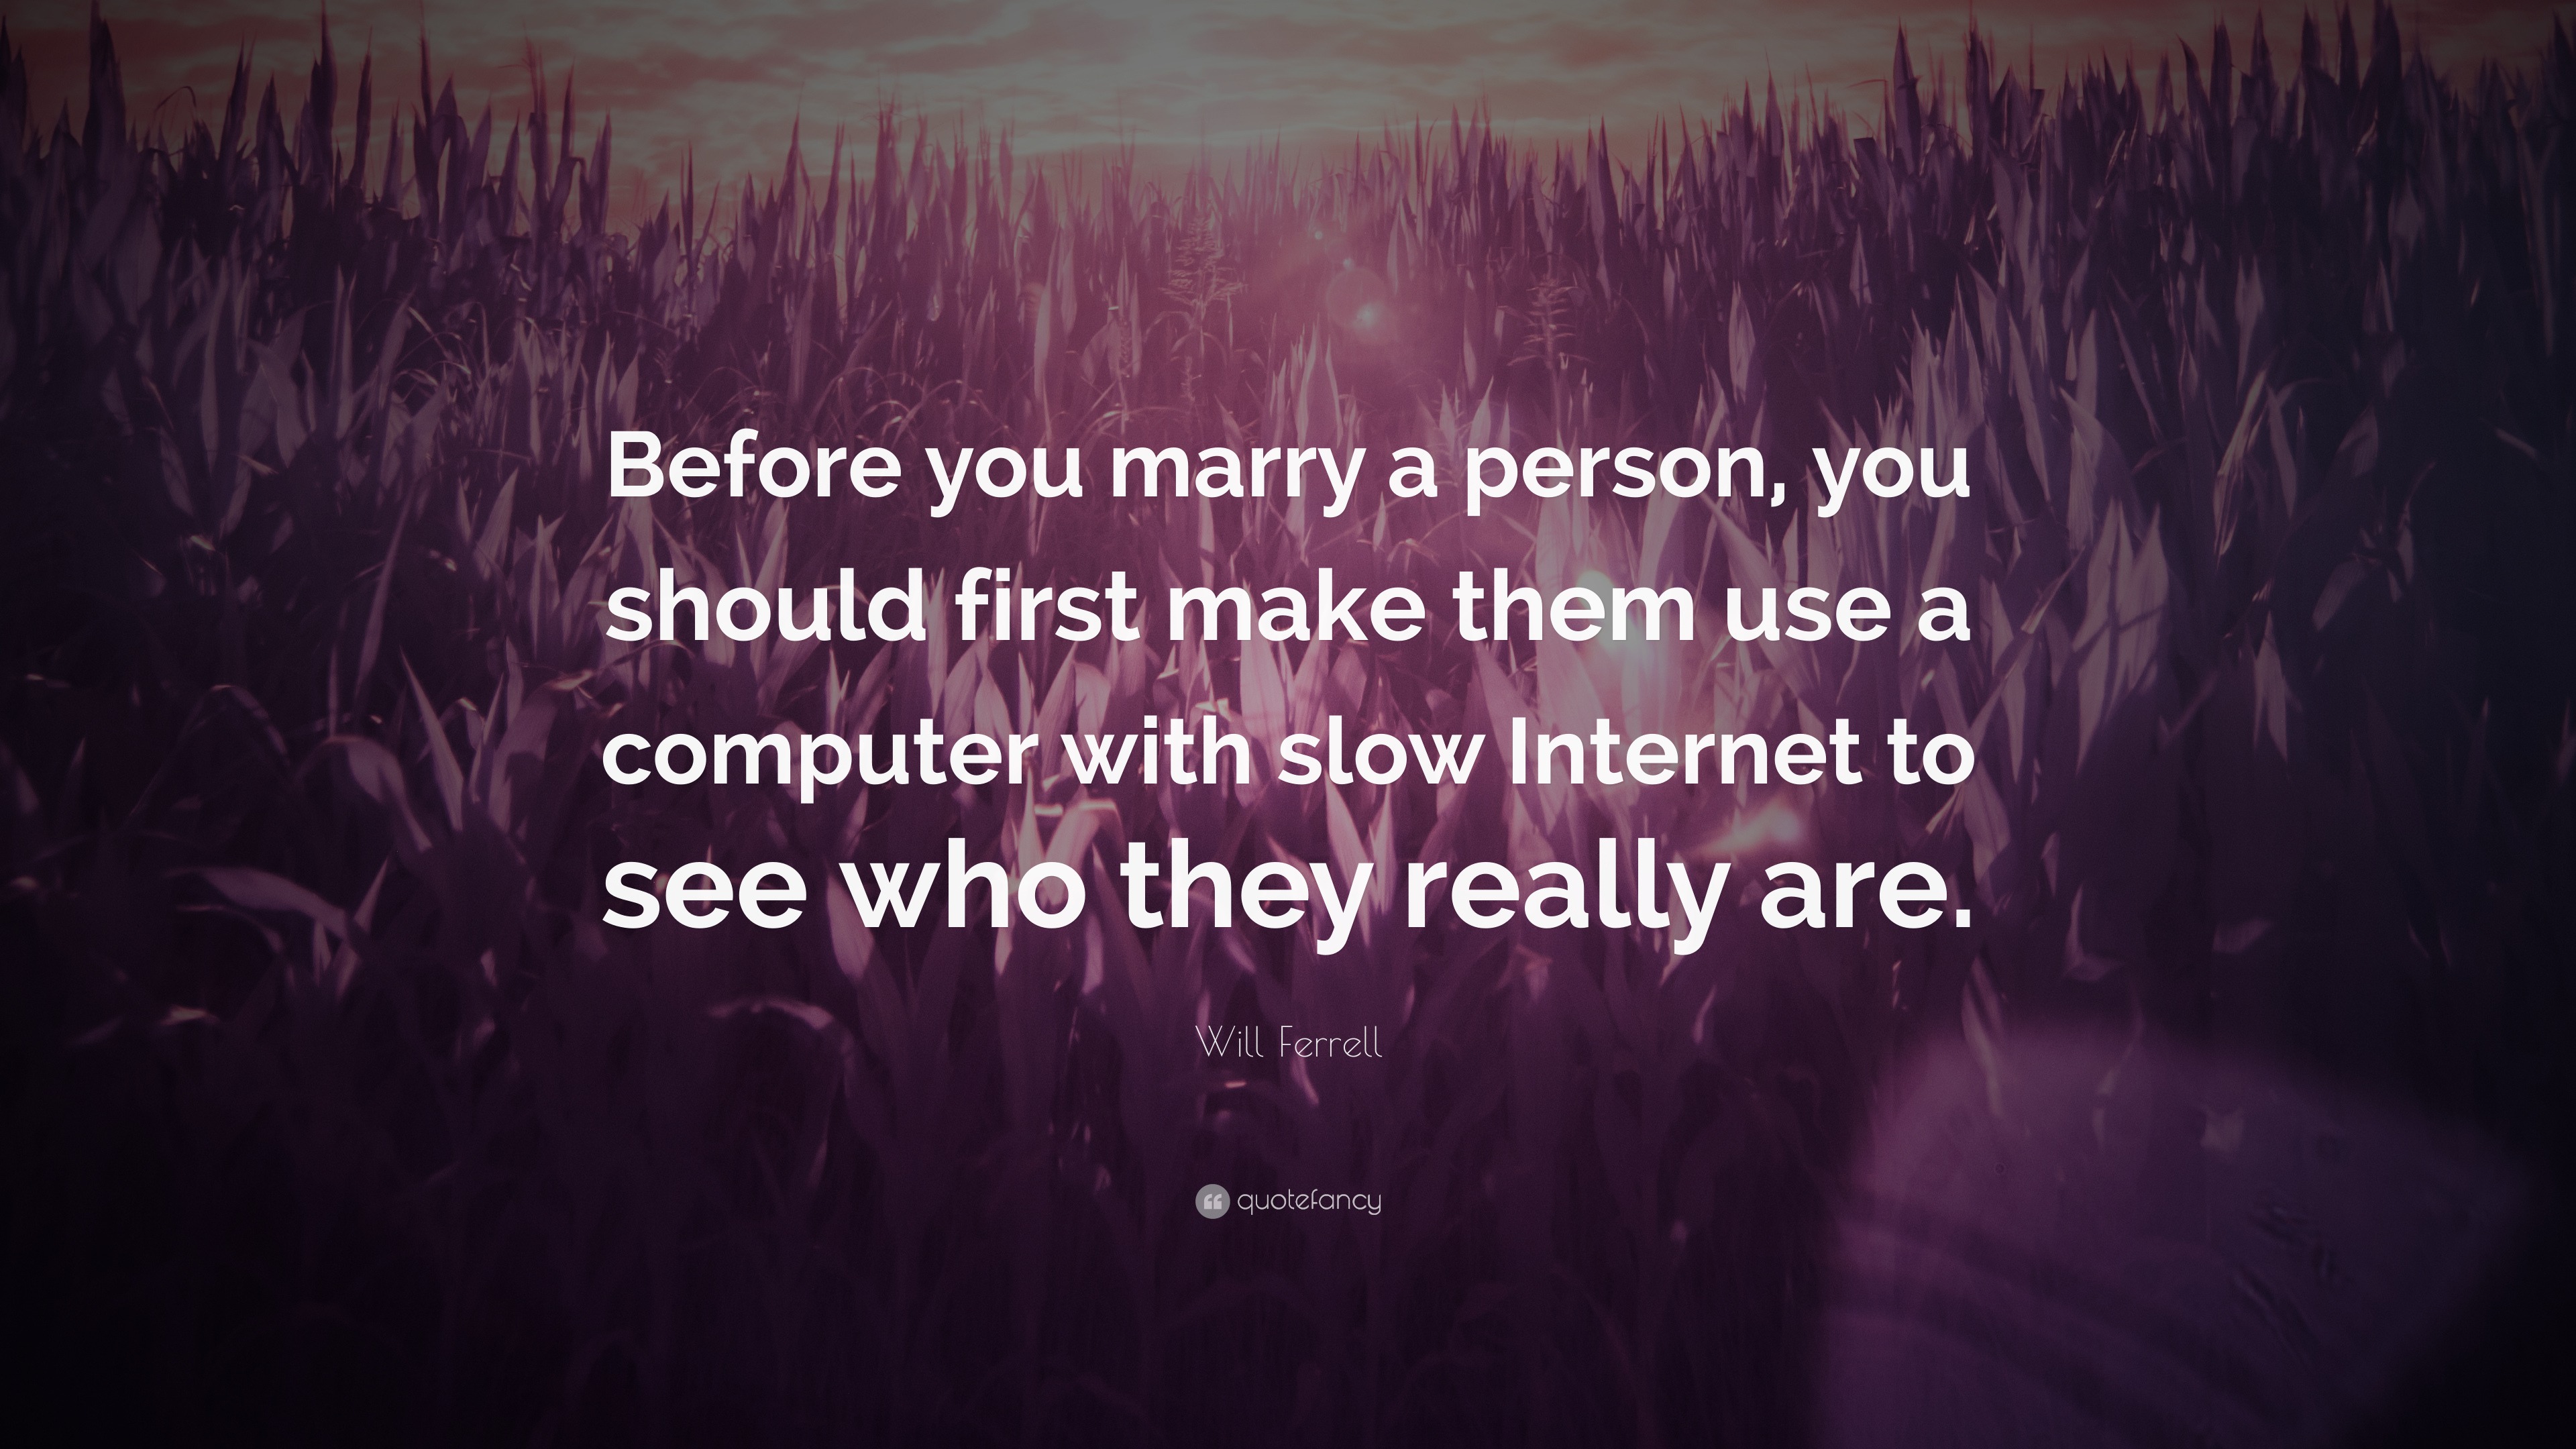 Will Ferrell Quote: “Before you marry a person, you should first make ...